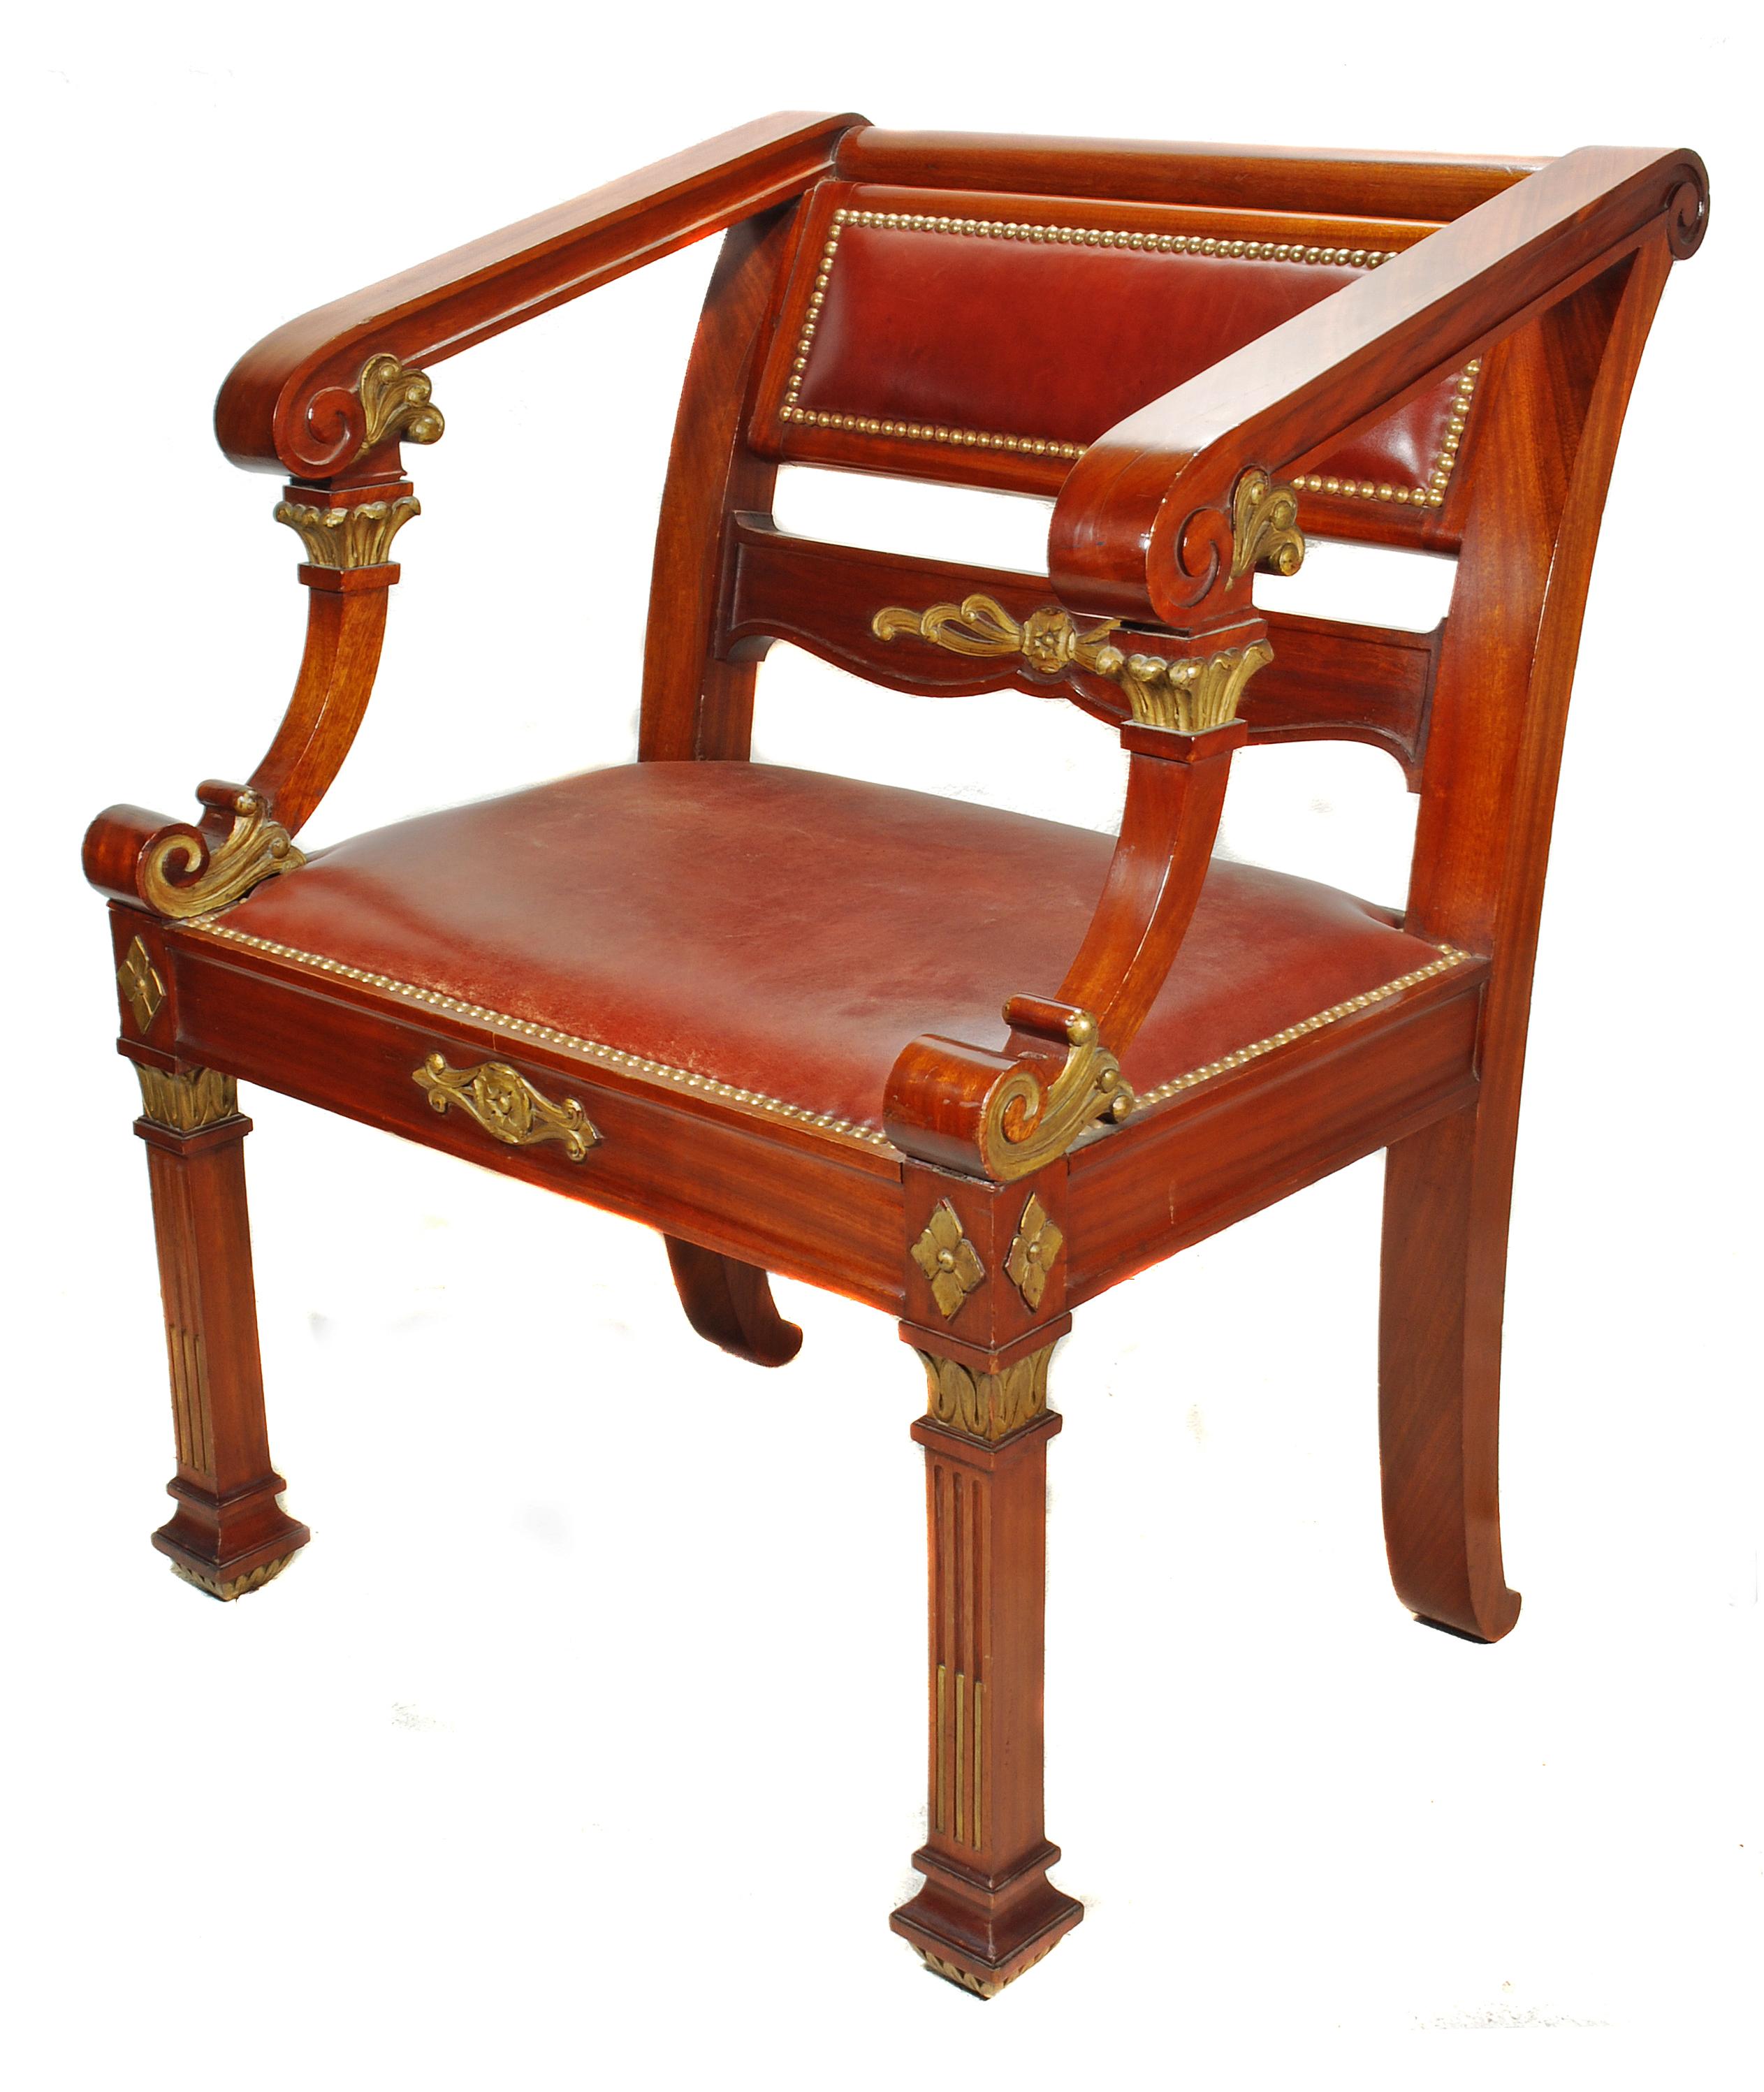 A large Napoleon III desk chair in mahogany, with original tan leather seat and backrest, lined with brass studwork, France, circa 1890. The frame with gilt foliate detailing to the backrest and apron, with a flower topping the front square legs,